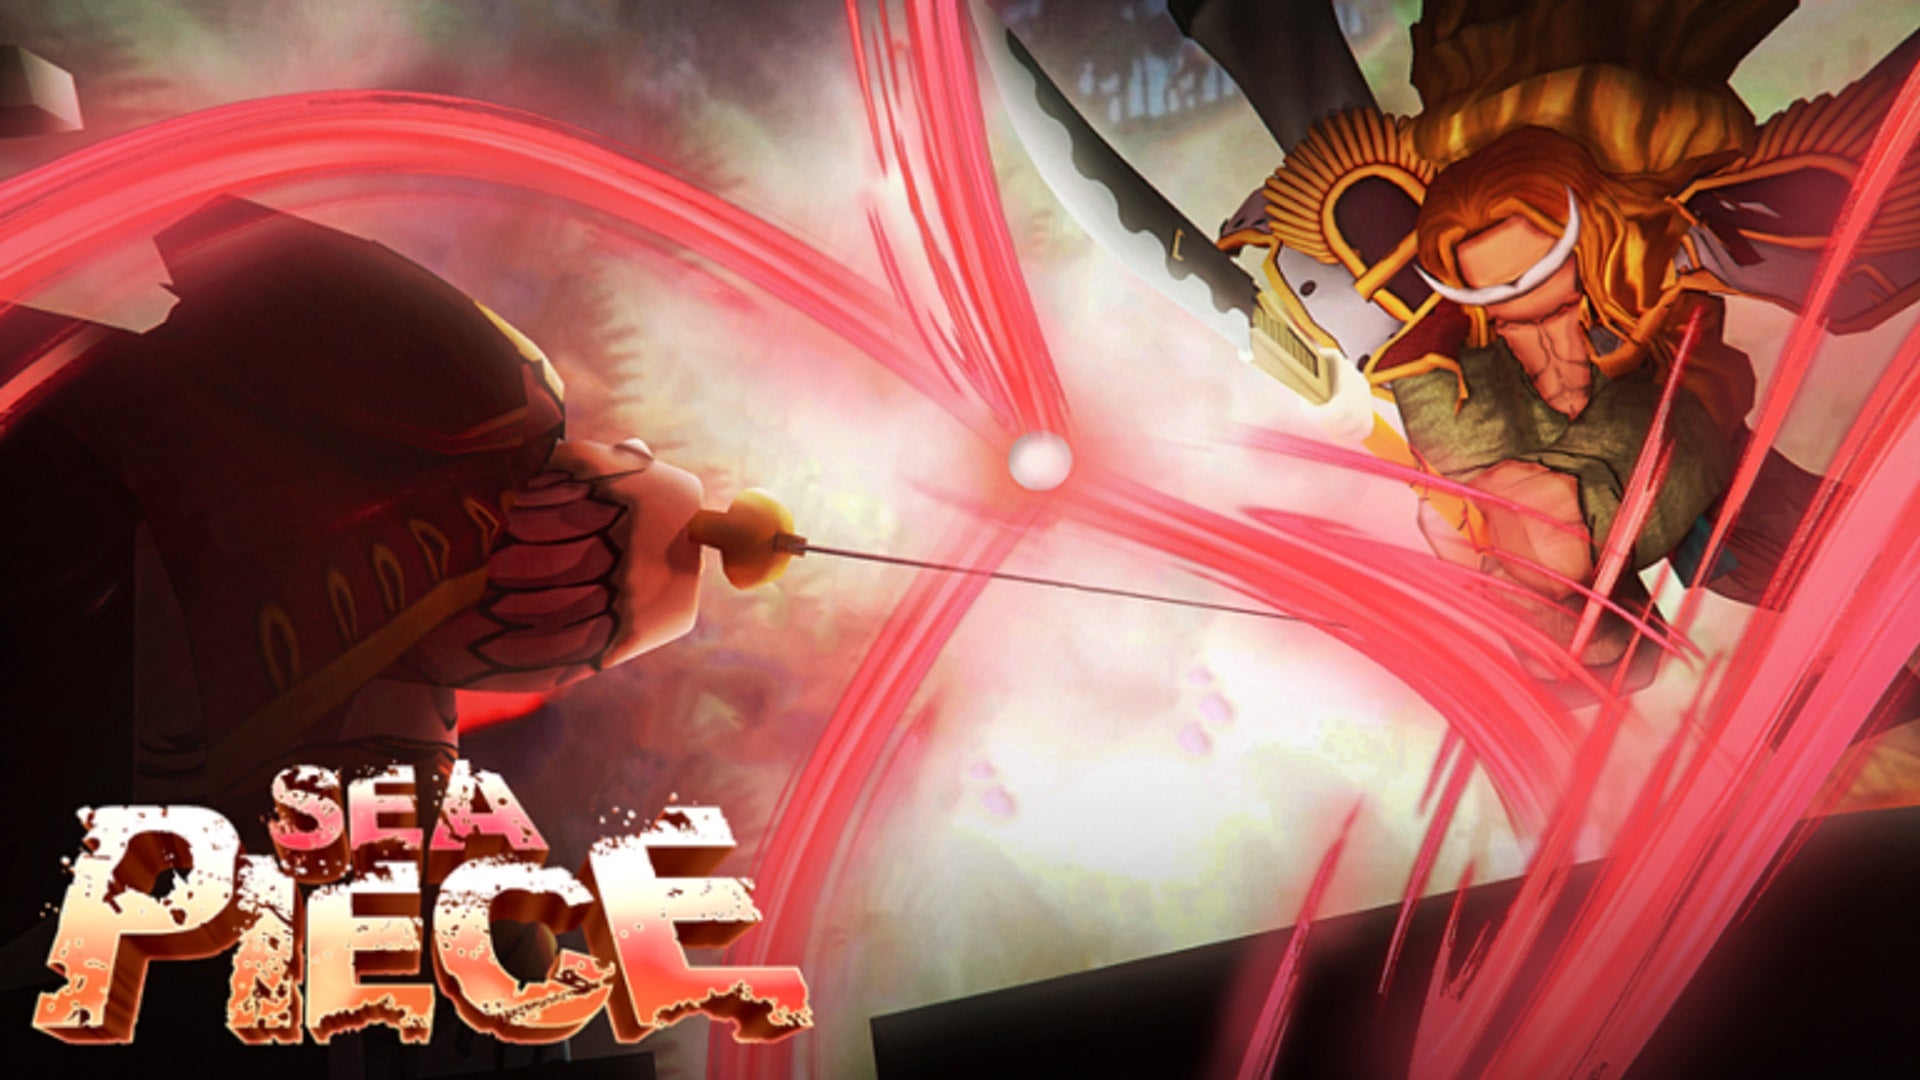 Two Roblox characters battle it out in a banner image for the game Sea Piece.